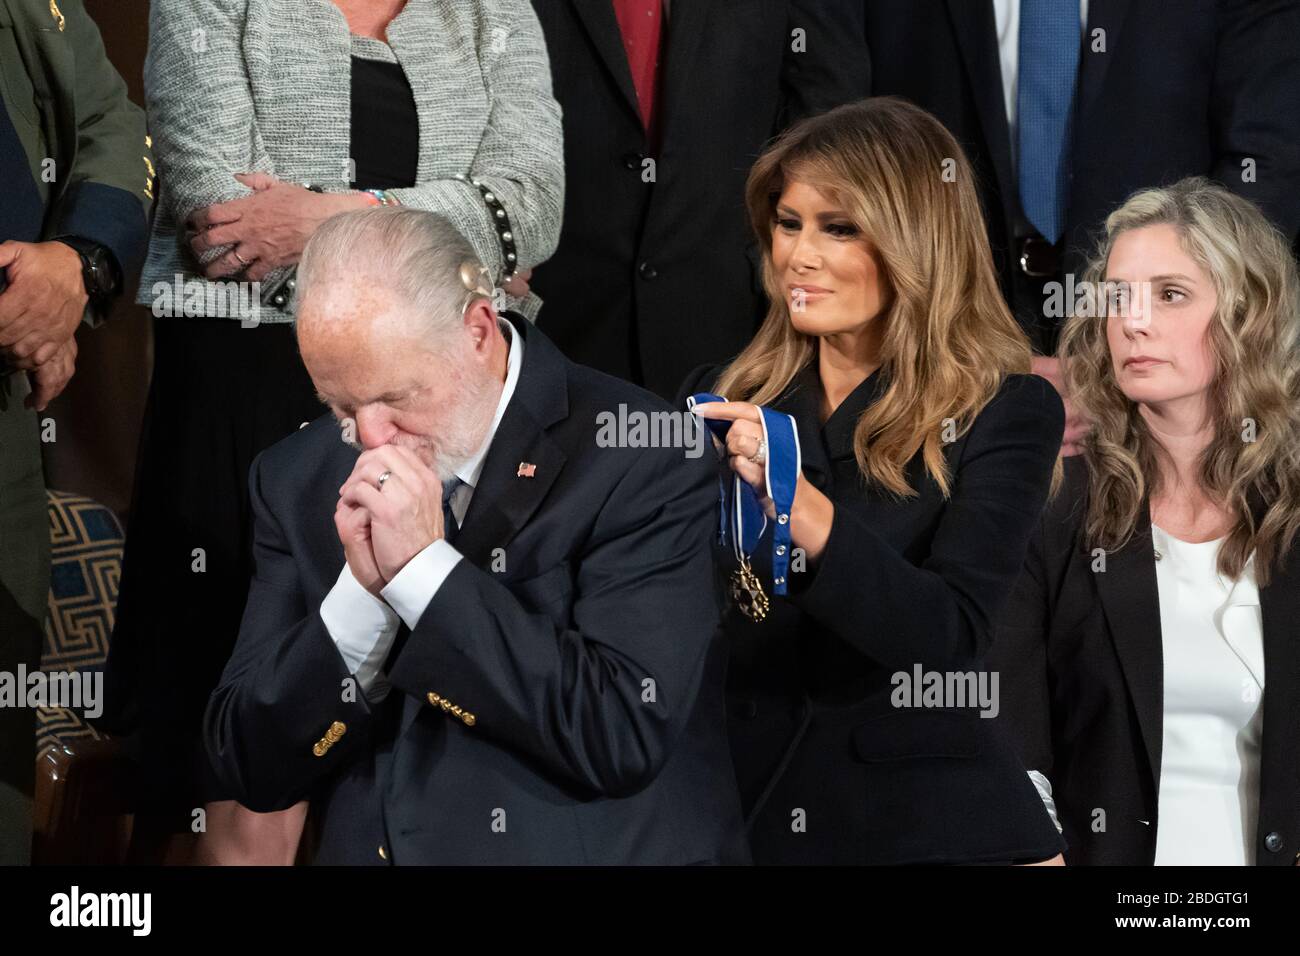 First Lady Melania Trump presents the Presidential Medal of Freedom to gallery guest Rush Limbaugh during President Donald J. Trump’s State of the Union address Tuesday, Feb. 4, 2020, in the House chamber at the U.S. Capitol in Washington, D.C. Stock Photo